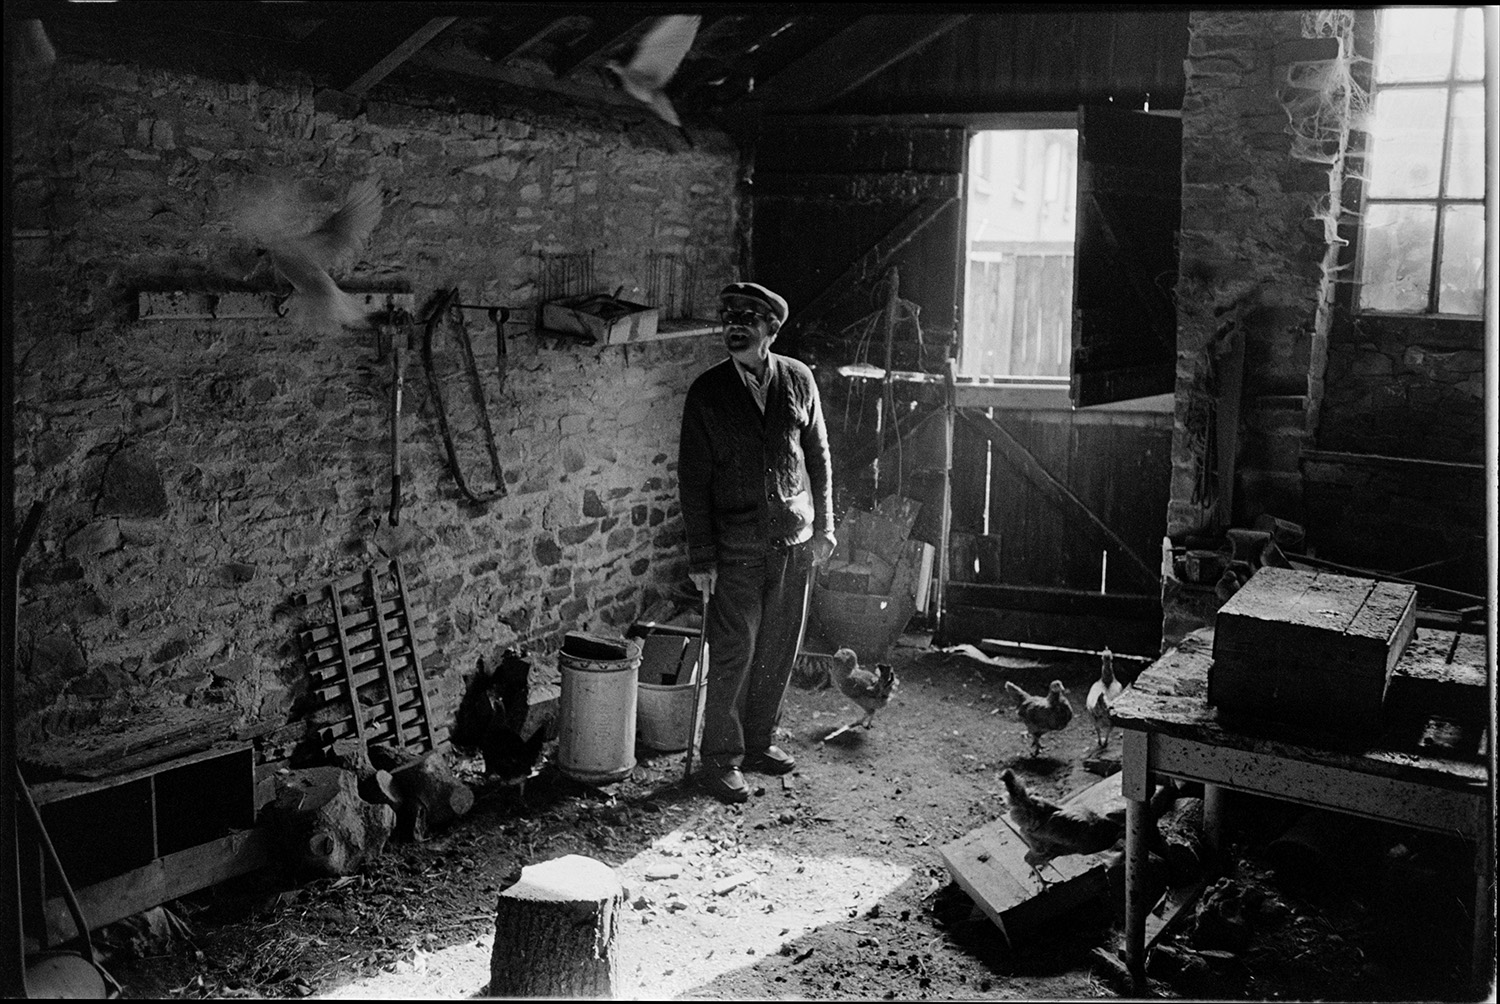 Man with his doves, pigeons and bantams in wheelwright's shop. 
[Mr Bright with doves and bantams in a former wheelwright's workshop by the churchyard path in Beaford. Various items of wood and logs are strewn around the workshop, and tools are hung on the wall.]